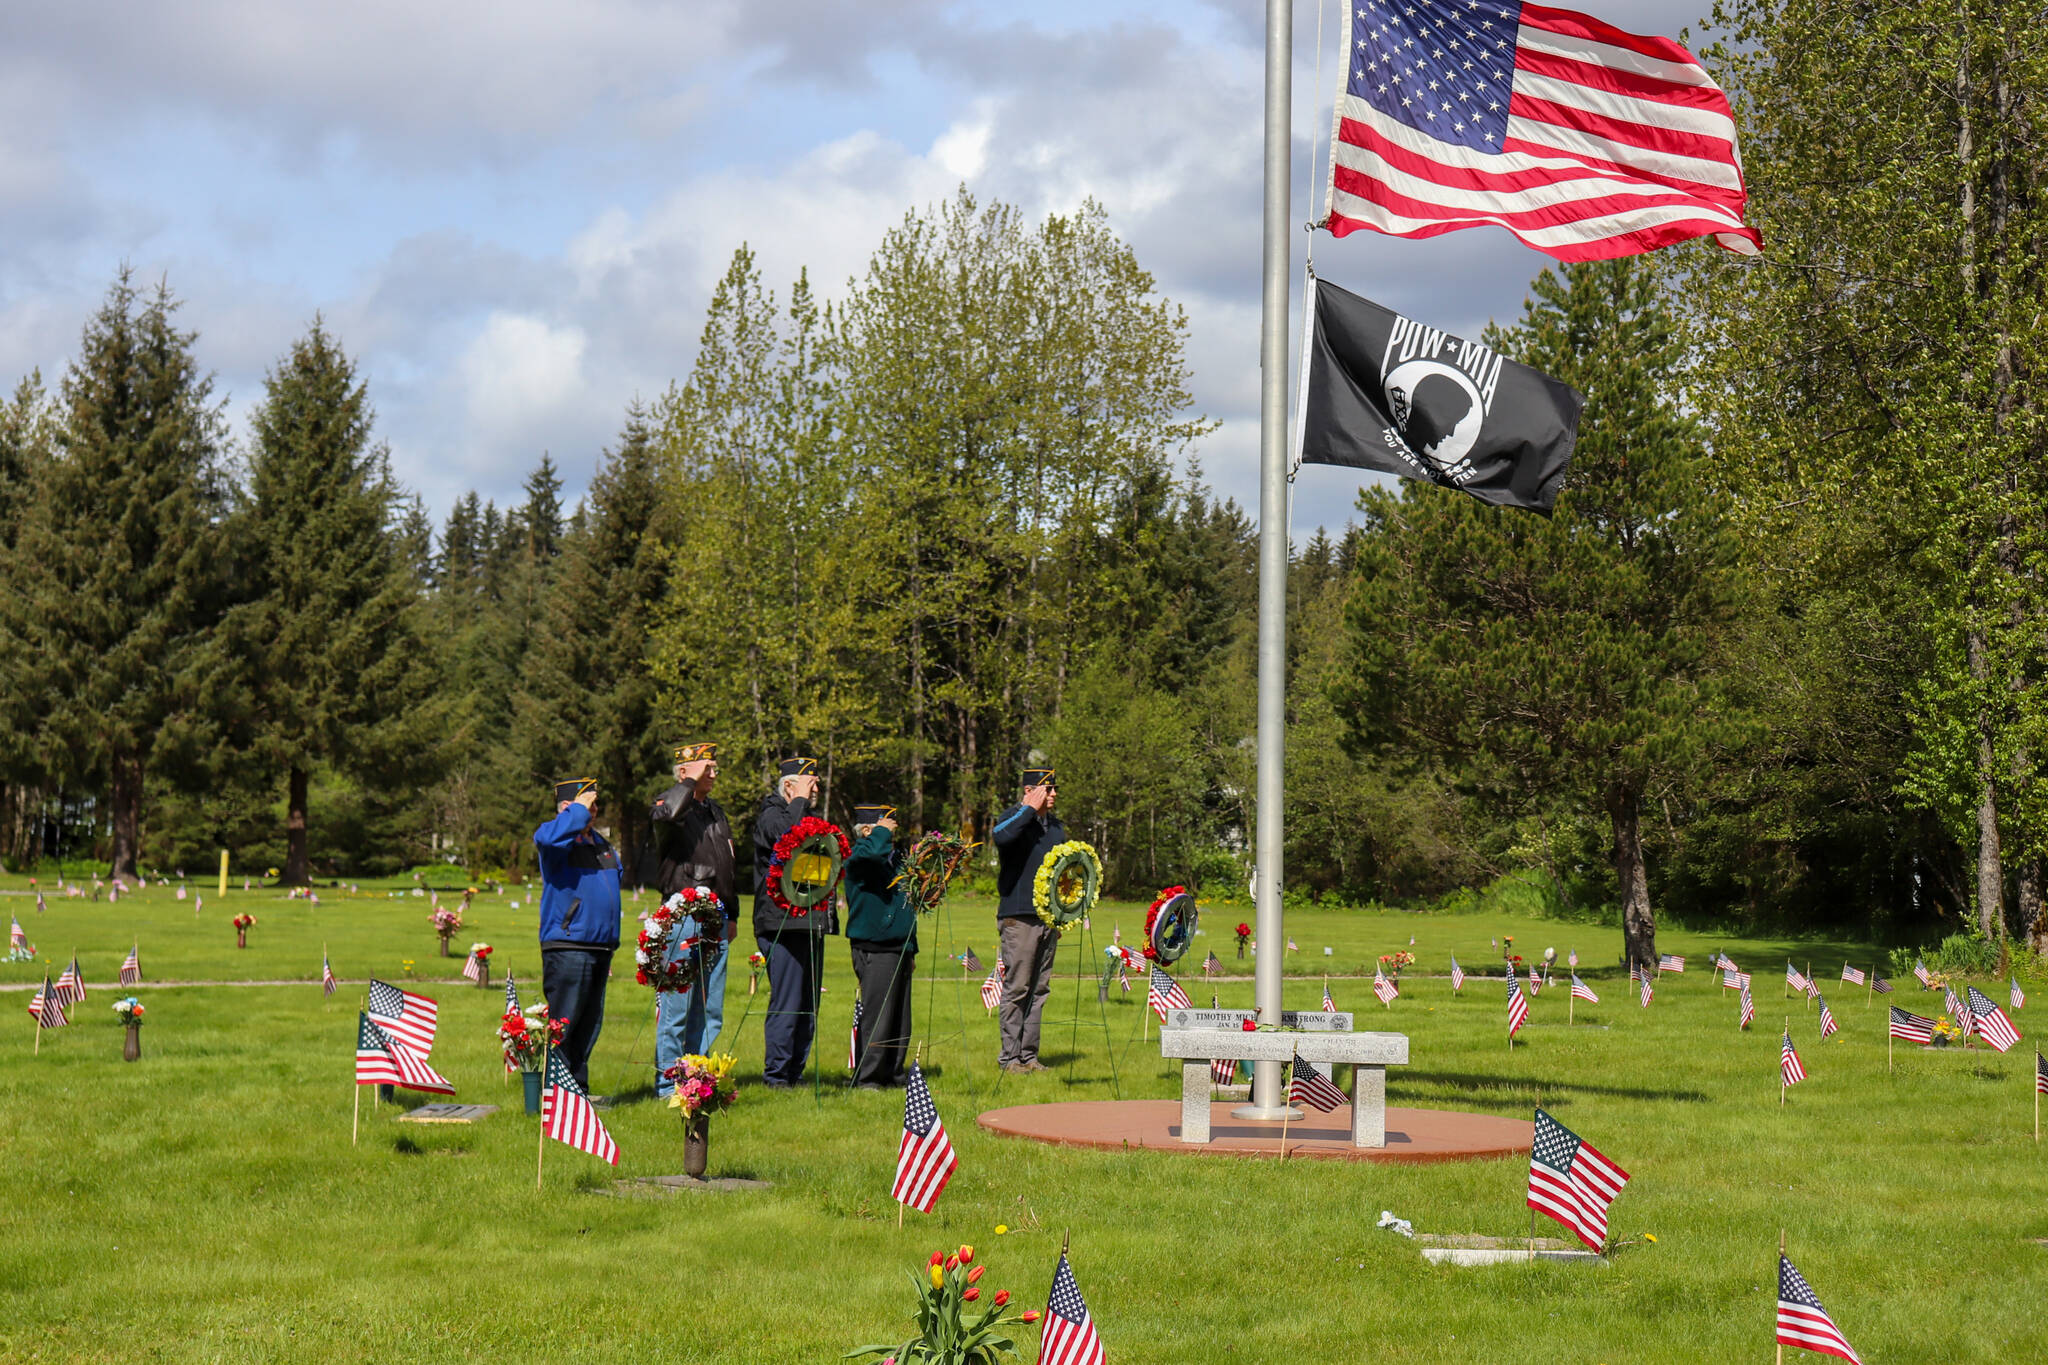 Wreath bearers present wreaths for fallen comrades, brothers and sisters in arms during a Memorial Day ceremony at Alaskan Memorial Park on Monday. Laying wreaths on the graves of fallen heroes is a way to honor and remember the sacrifices made. (Jasz Garrett / Juneau Empire)